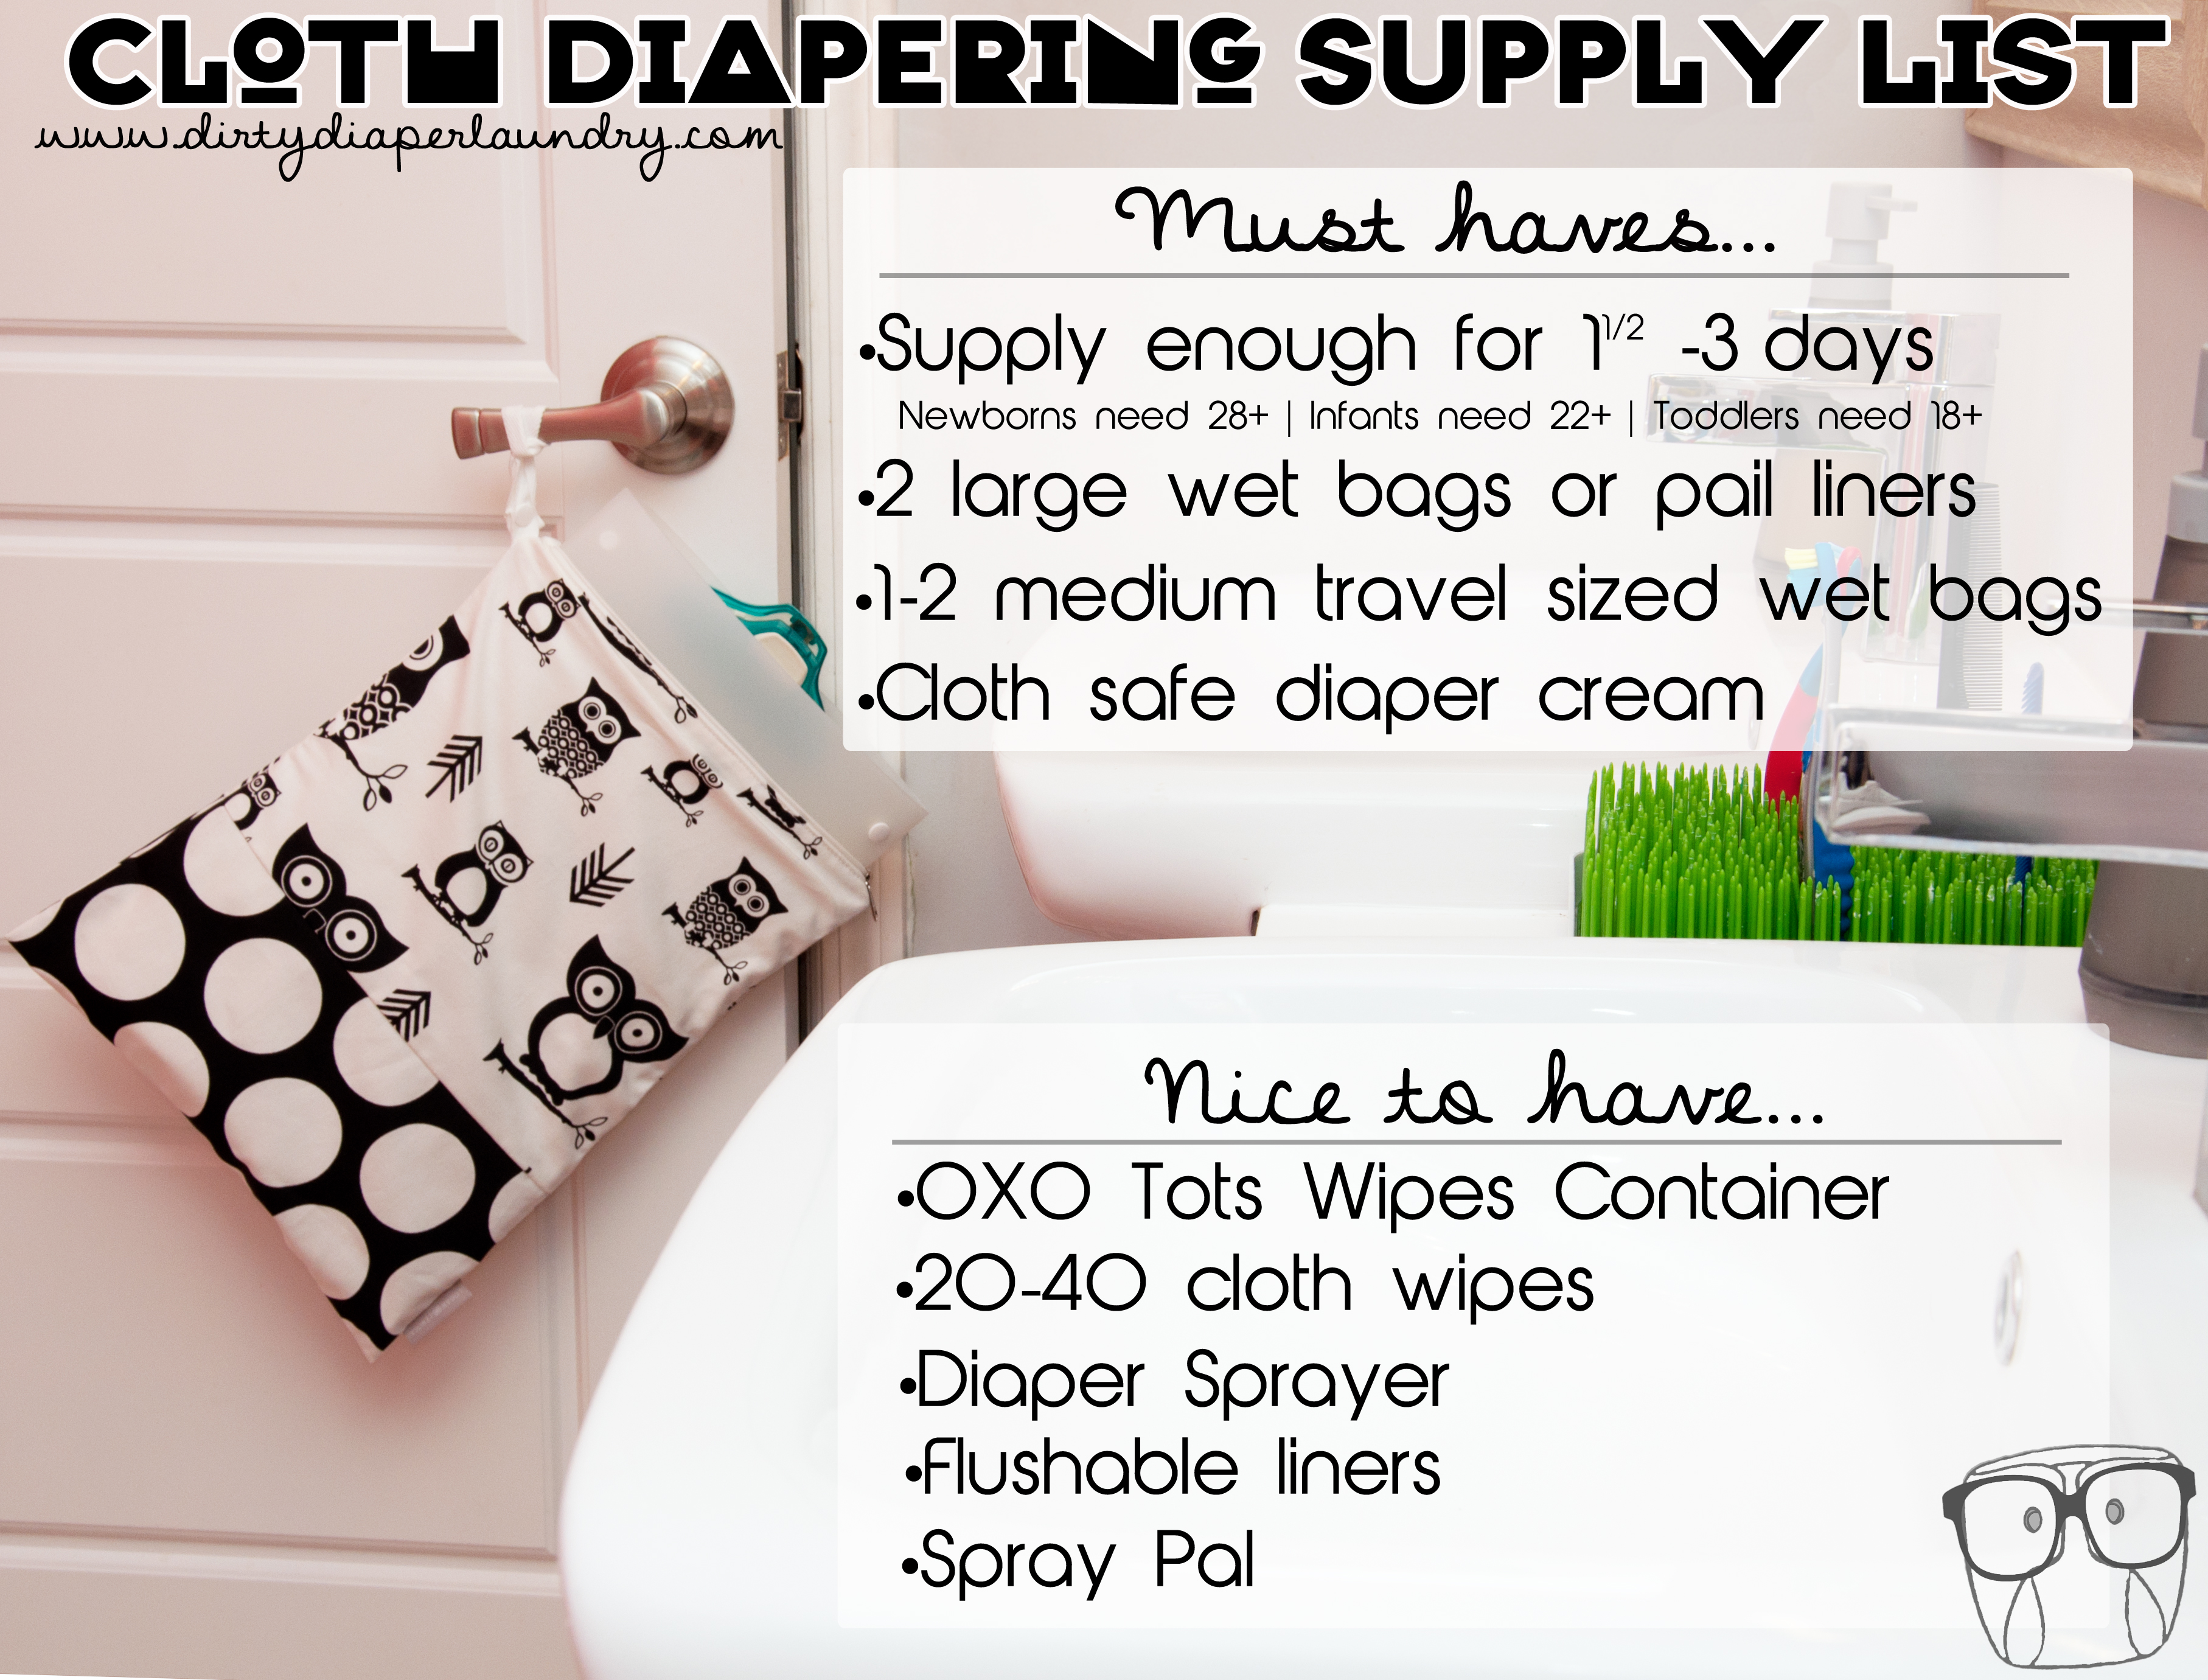 Supplies needed to get started with cloth diapers